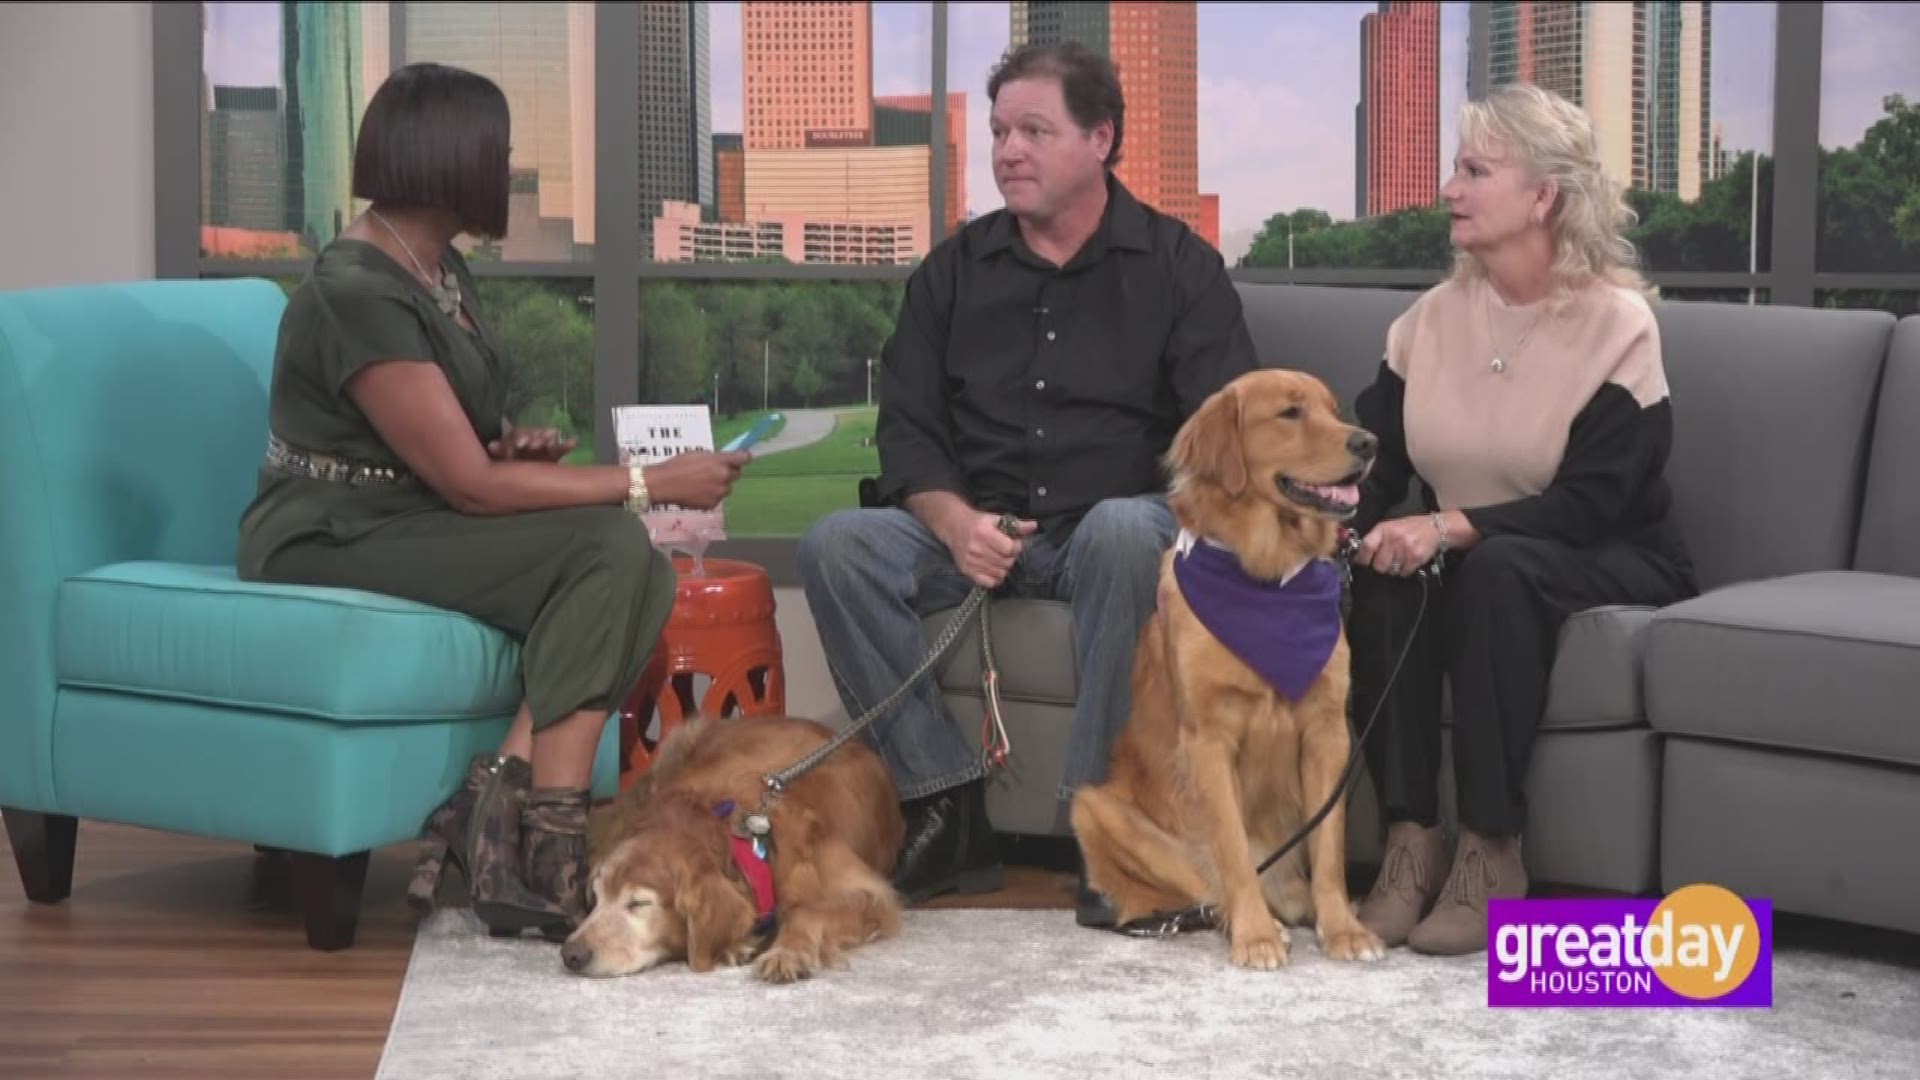 U.S. Army Veteran, Conrad DeGrace, Jr. and his wife Patricia share the story of how his rescue dog helped him survive PTSD.